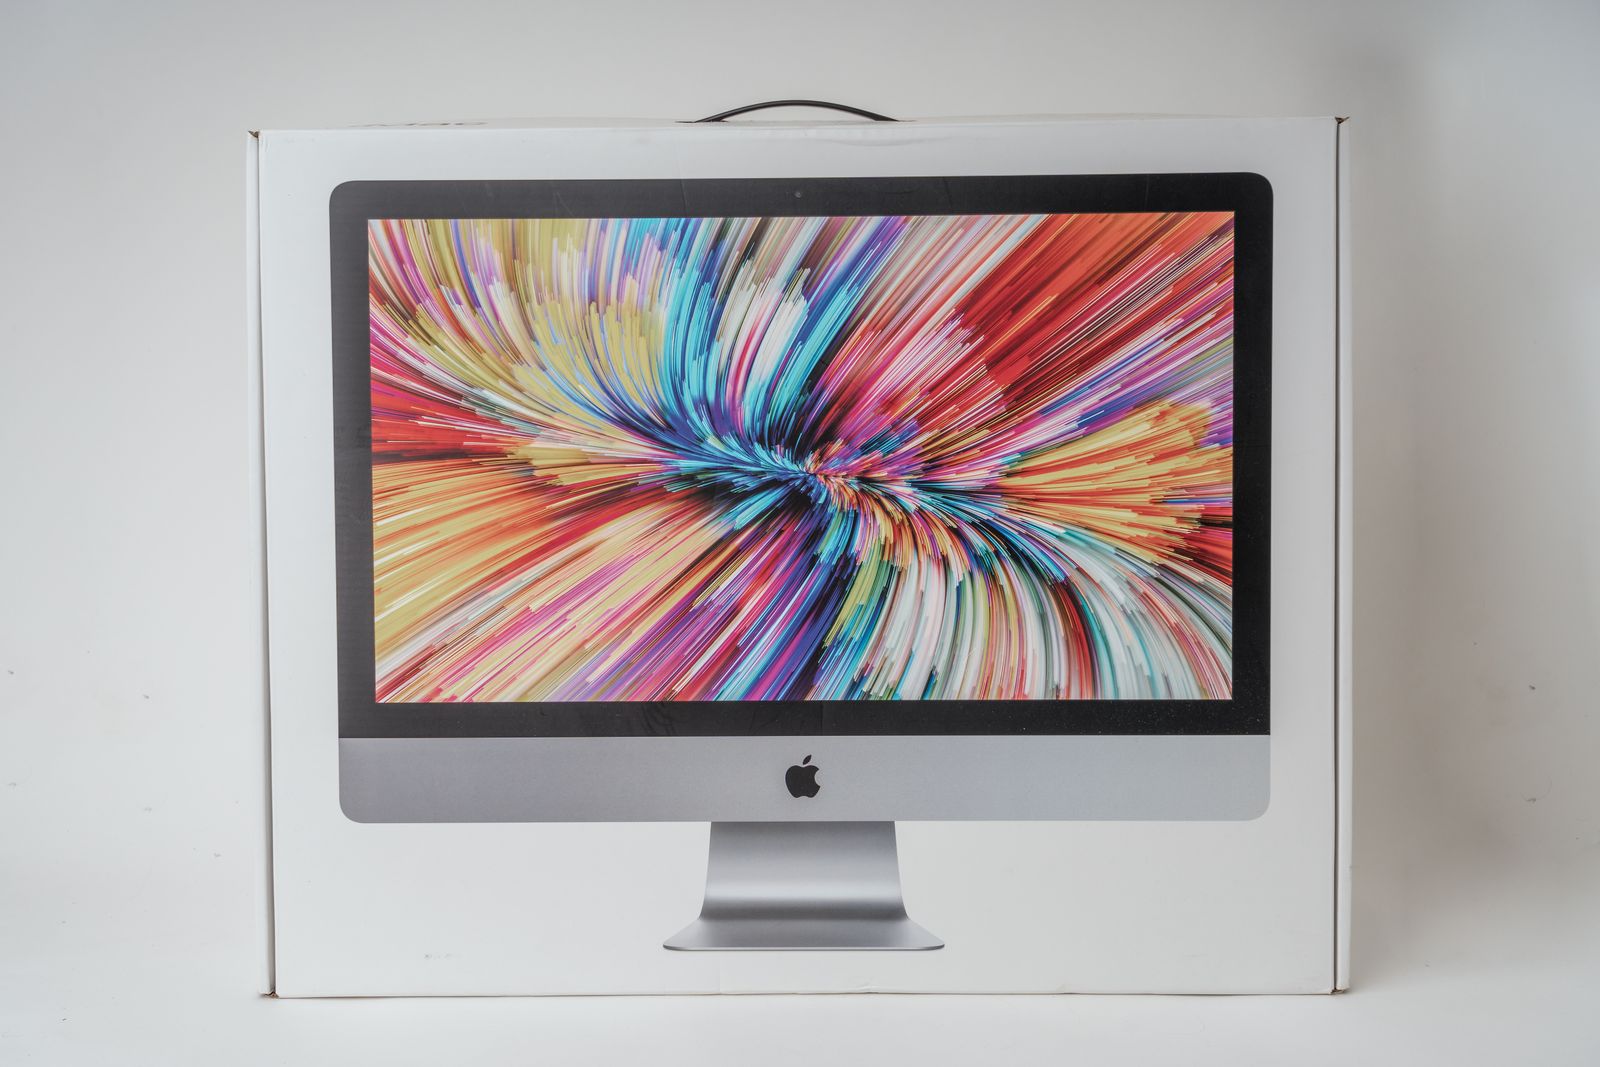 iMac (Retina 5K, 27-inch, late 2019) TOP SPEC From FilmMe LLC On 